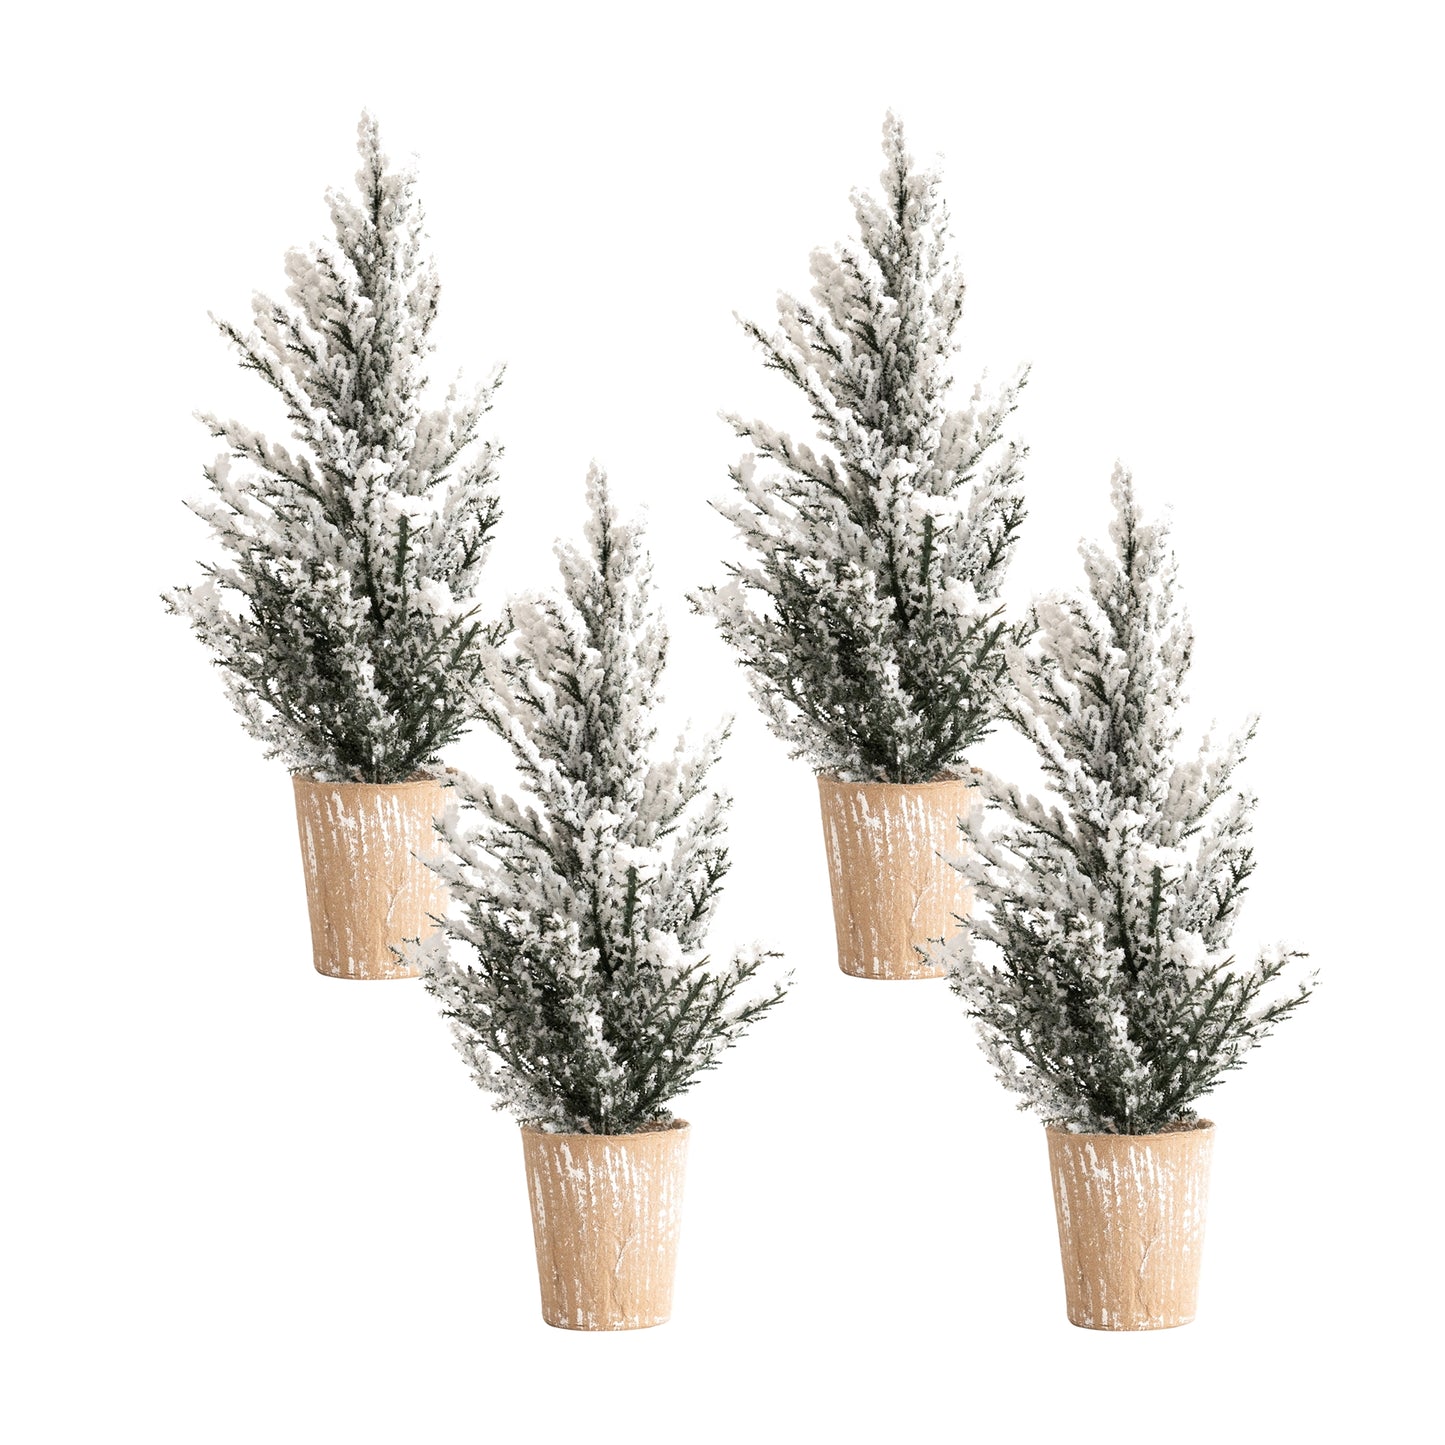 Flocked Holiday Pine Tree with Plastic Pot (Set of 4)